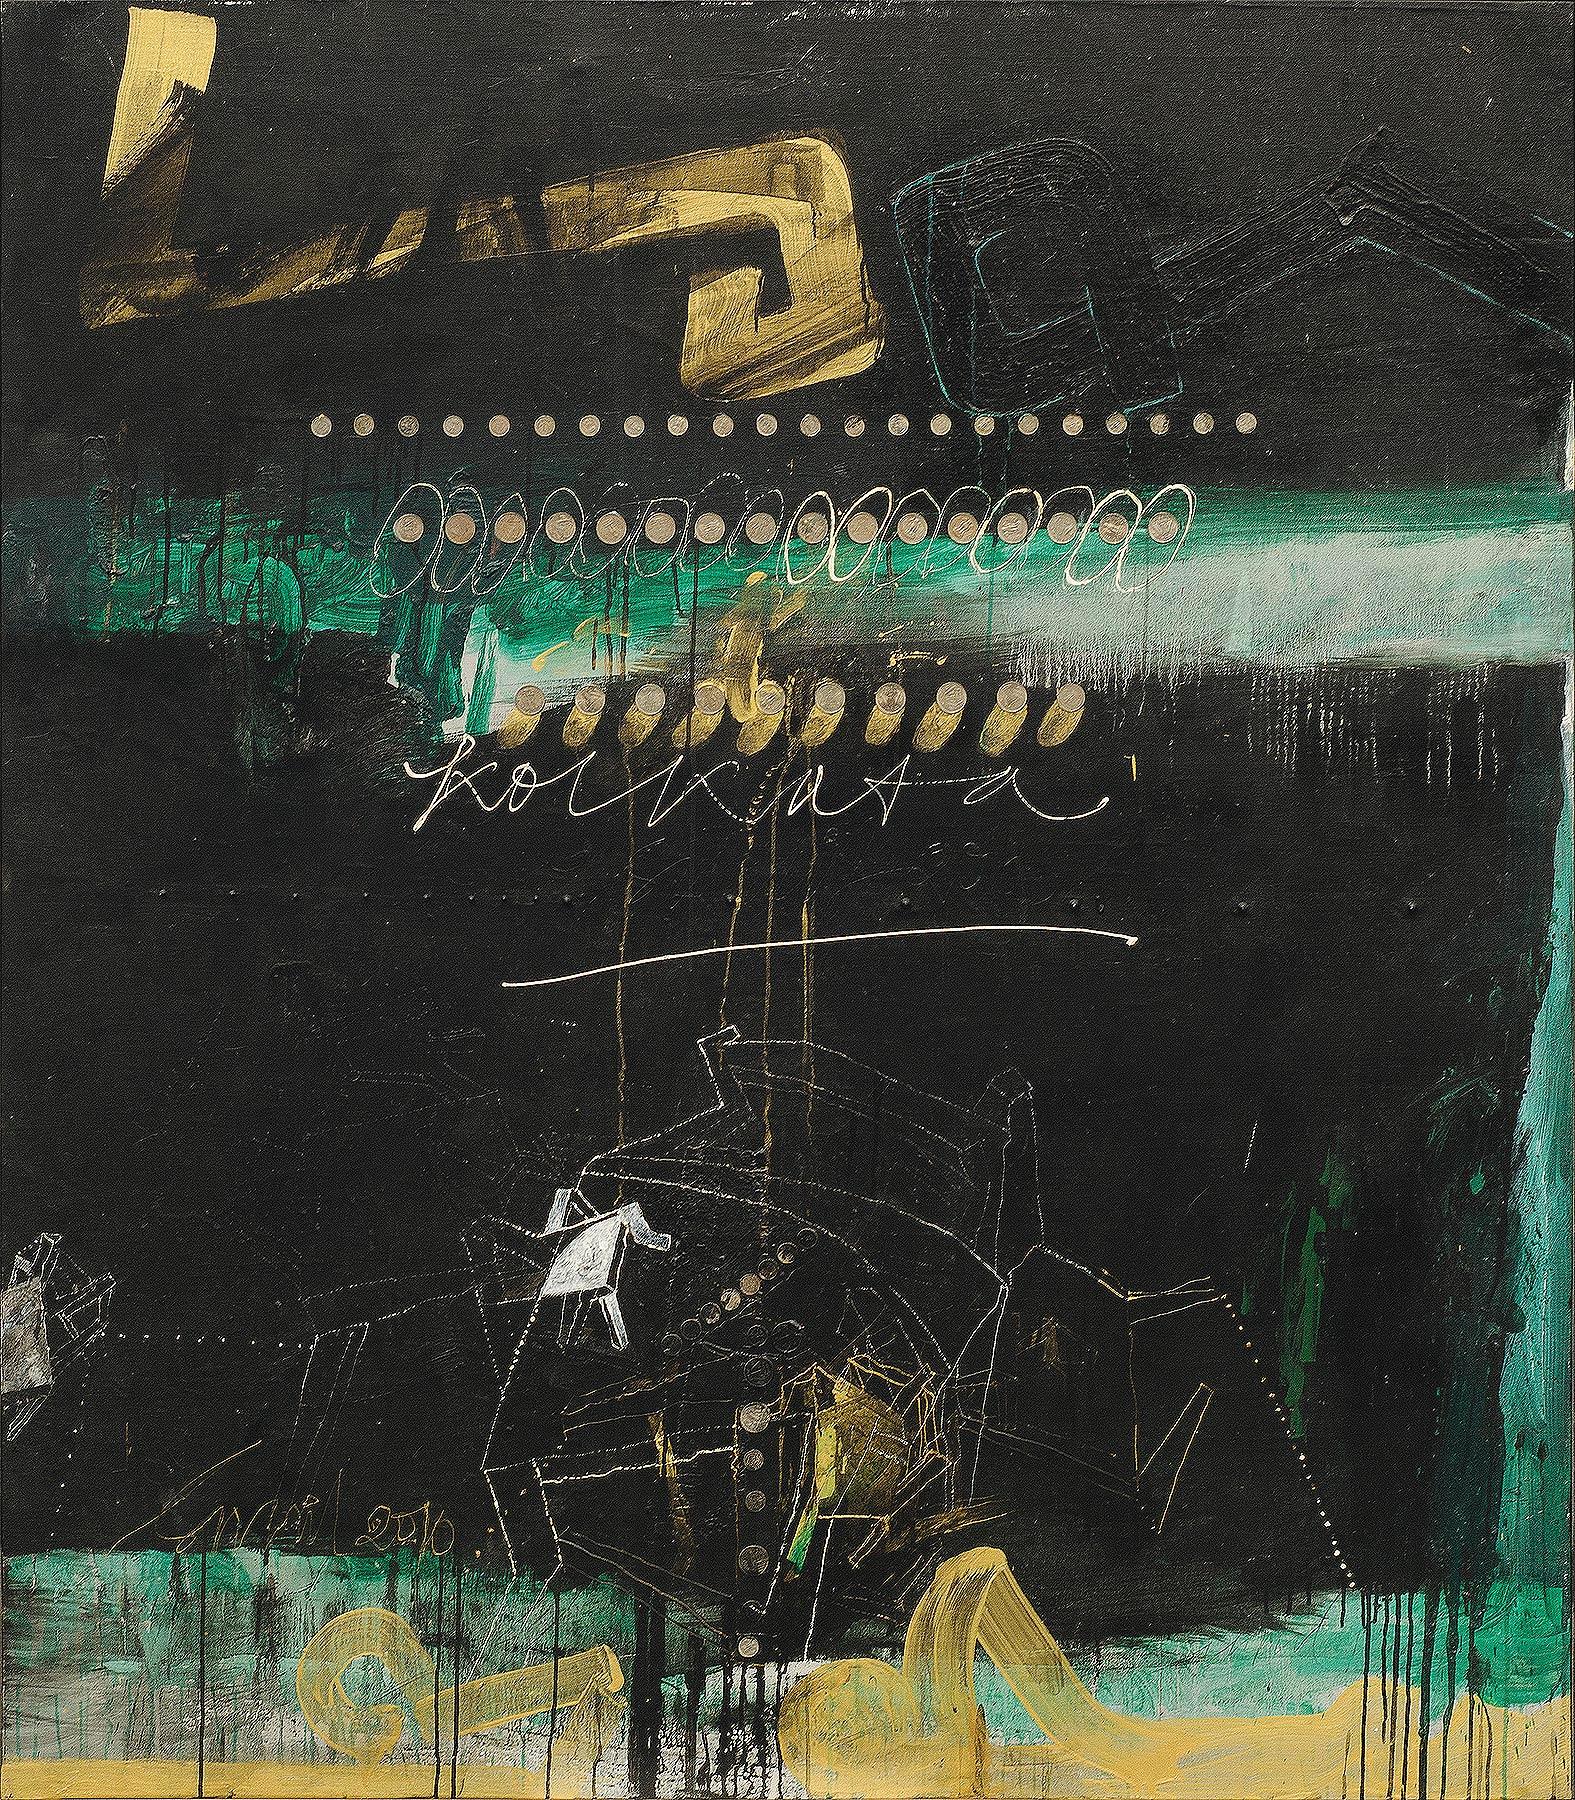 Abstract Art, Oil, Acrylic, Coins on Canvas, Green, Black, Gold colors"In Stock"